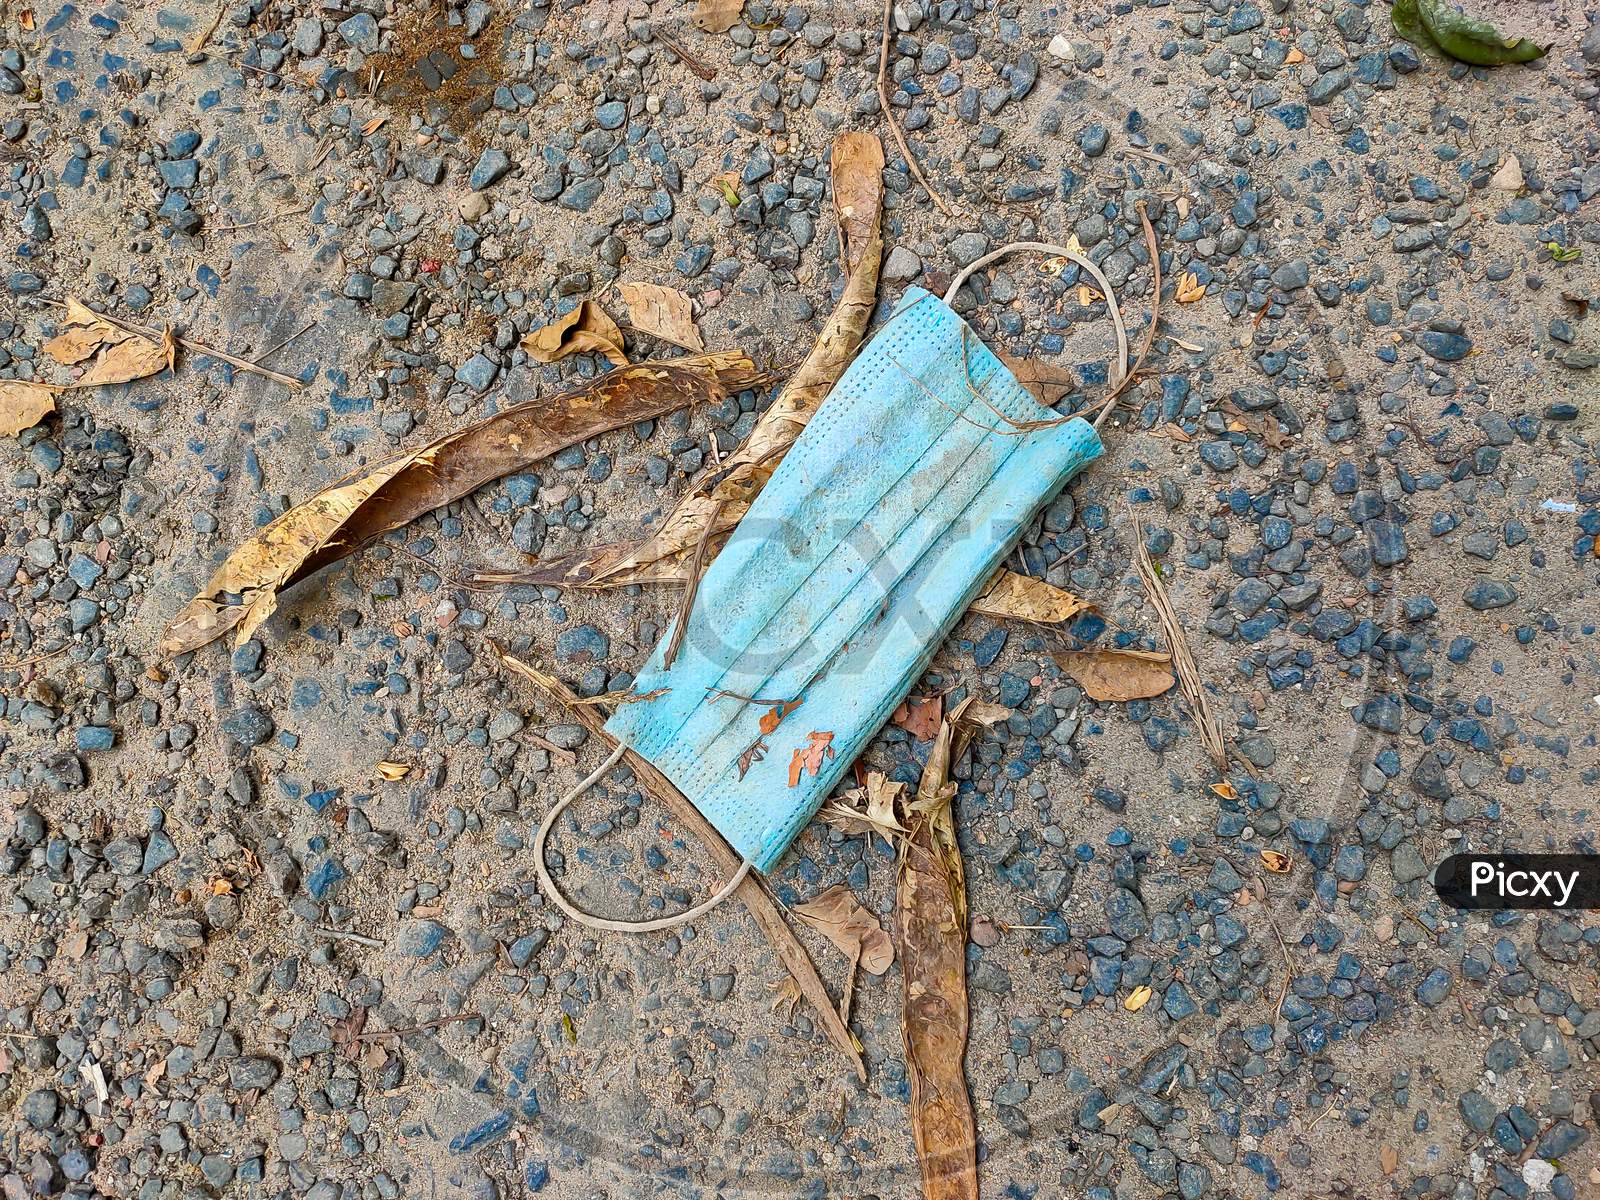 The Environmental Impact Of Abandoned Disposable And Used Face Masks On Street.